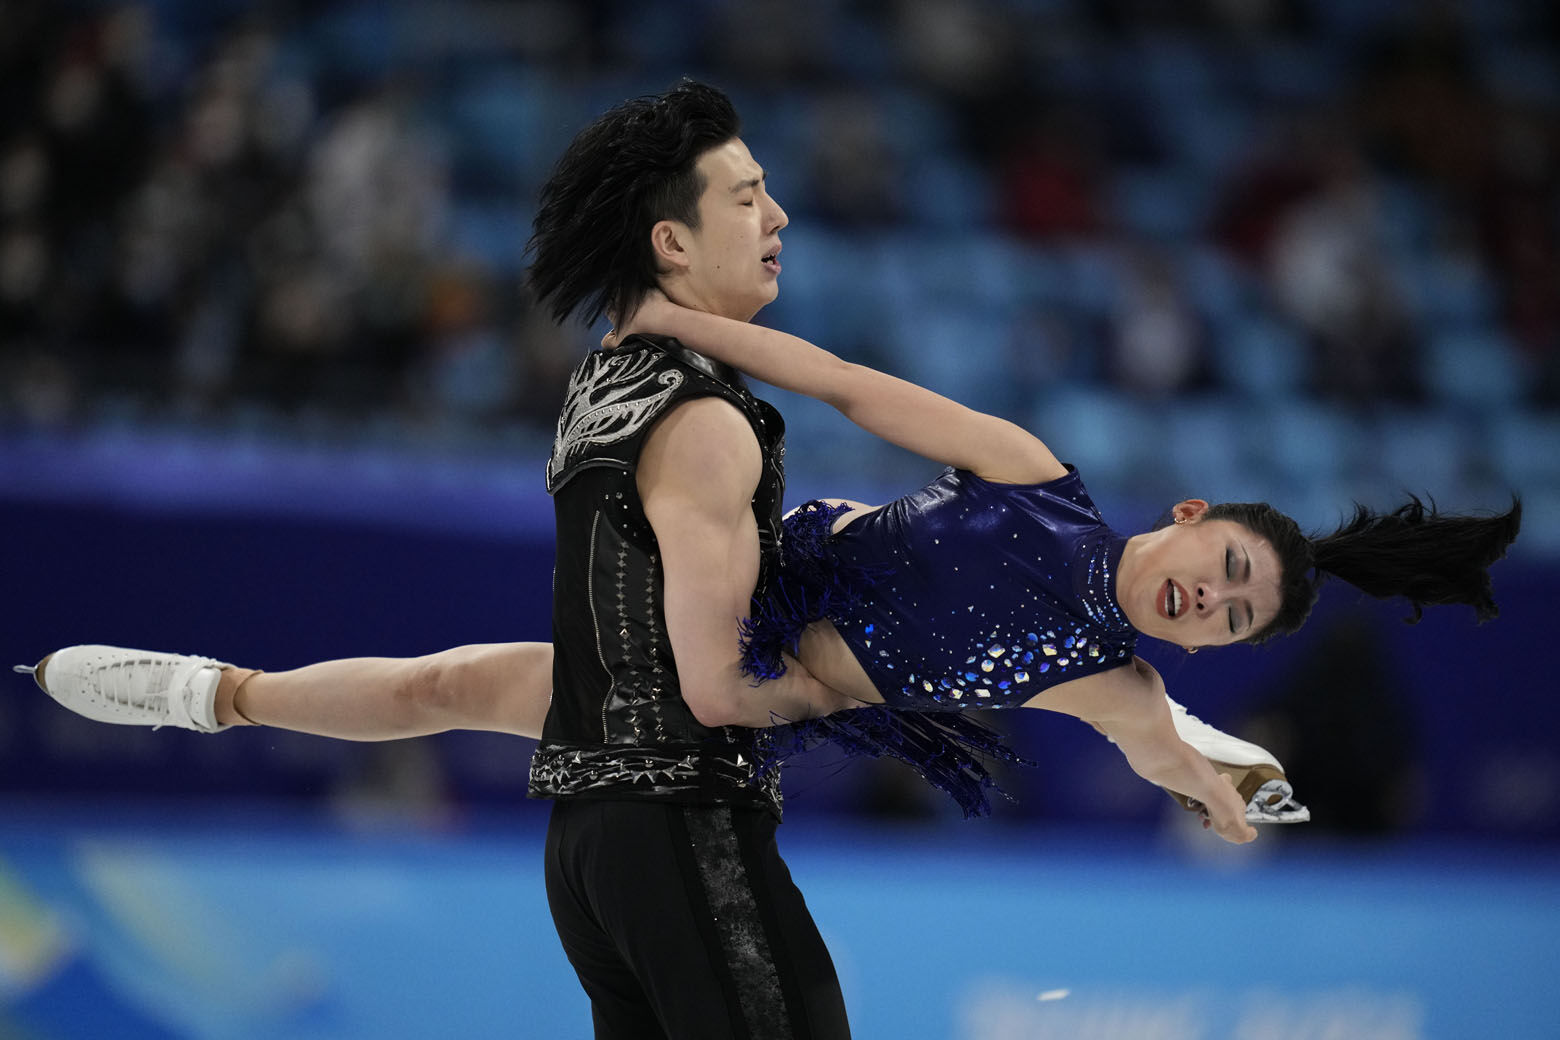 <p>Wang Shiyue and Liu Xinyu, of China, perform their routine in the ice dance competition during figure skating at the 2022 Winter Olympics, Saturday, Feb. 12, 2022, in Beijing.</p>
